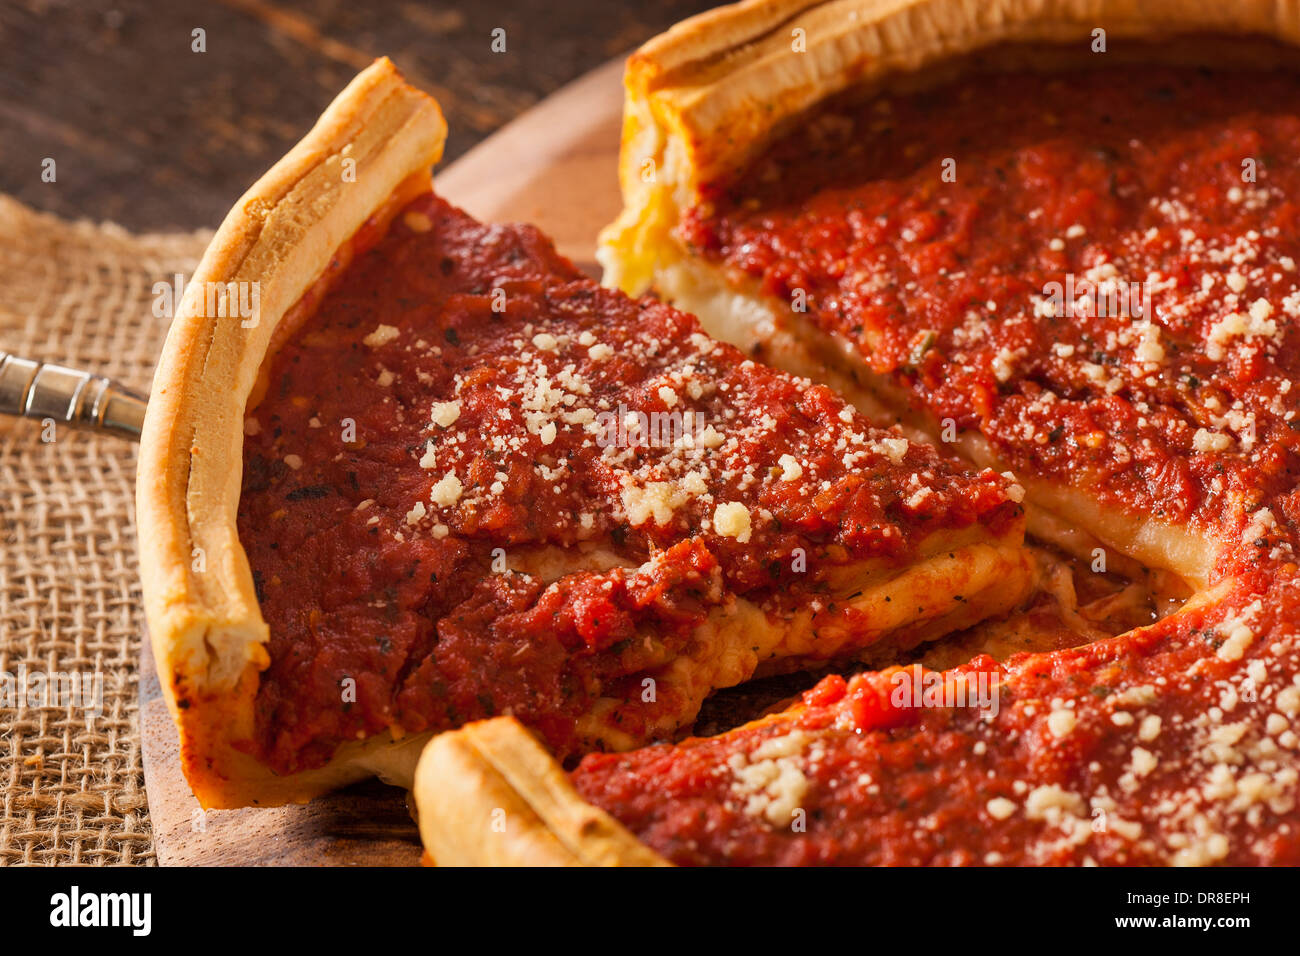 Chicago Style Deep Dish Cheese Pizza with Tomato Sauce Stock Photo